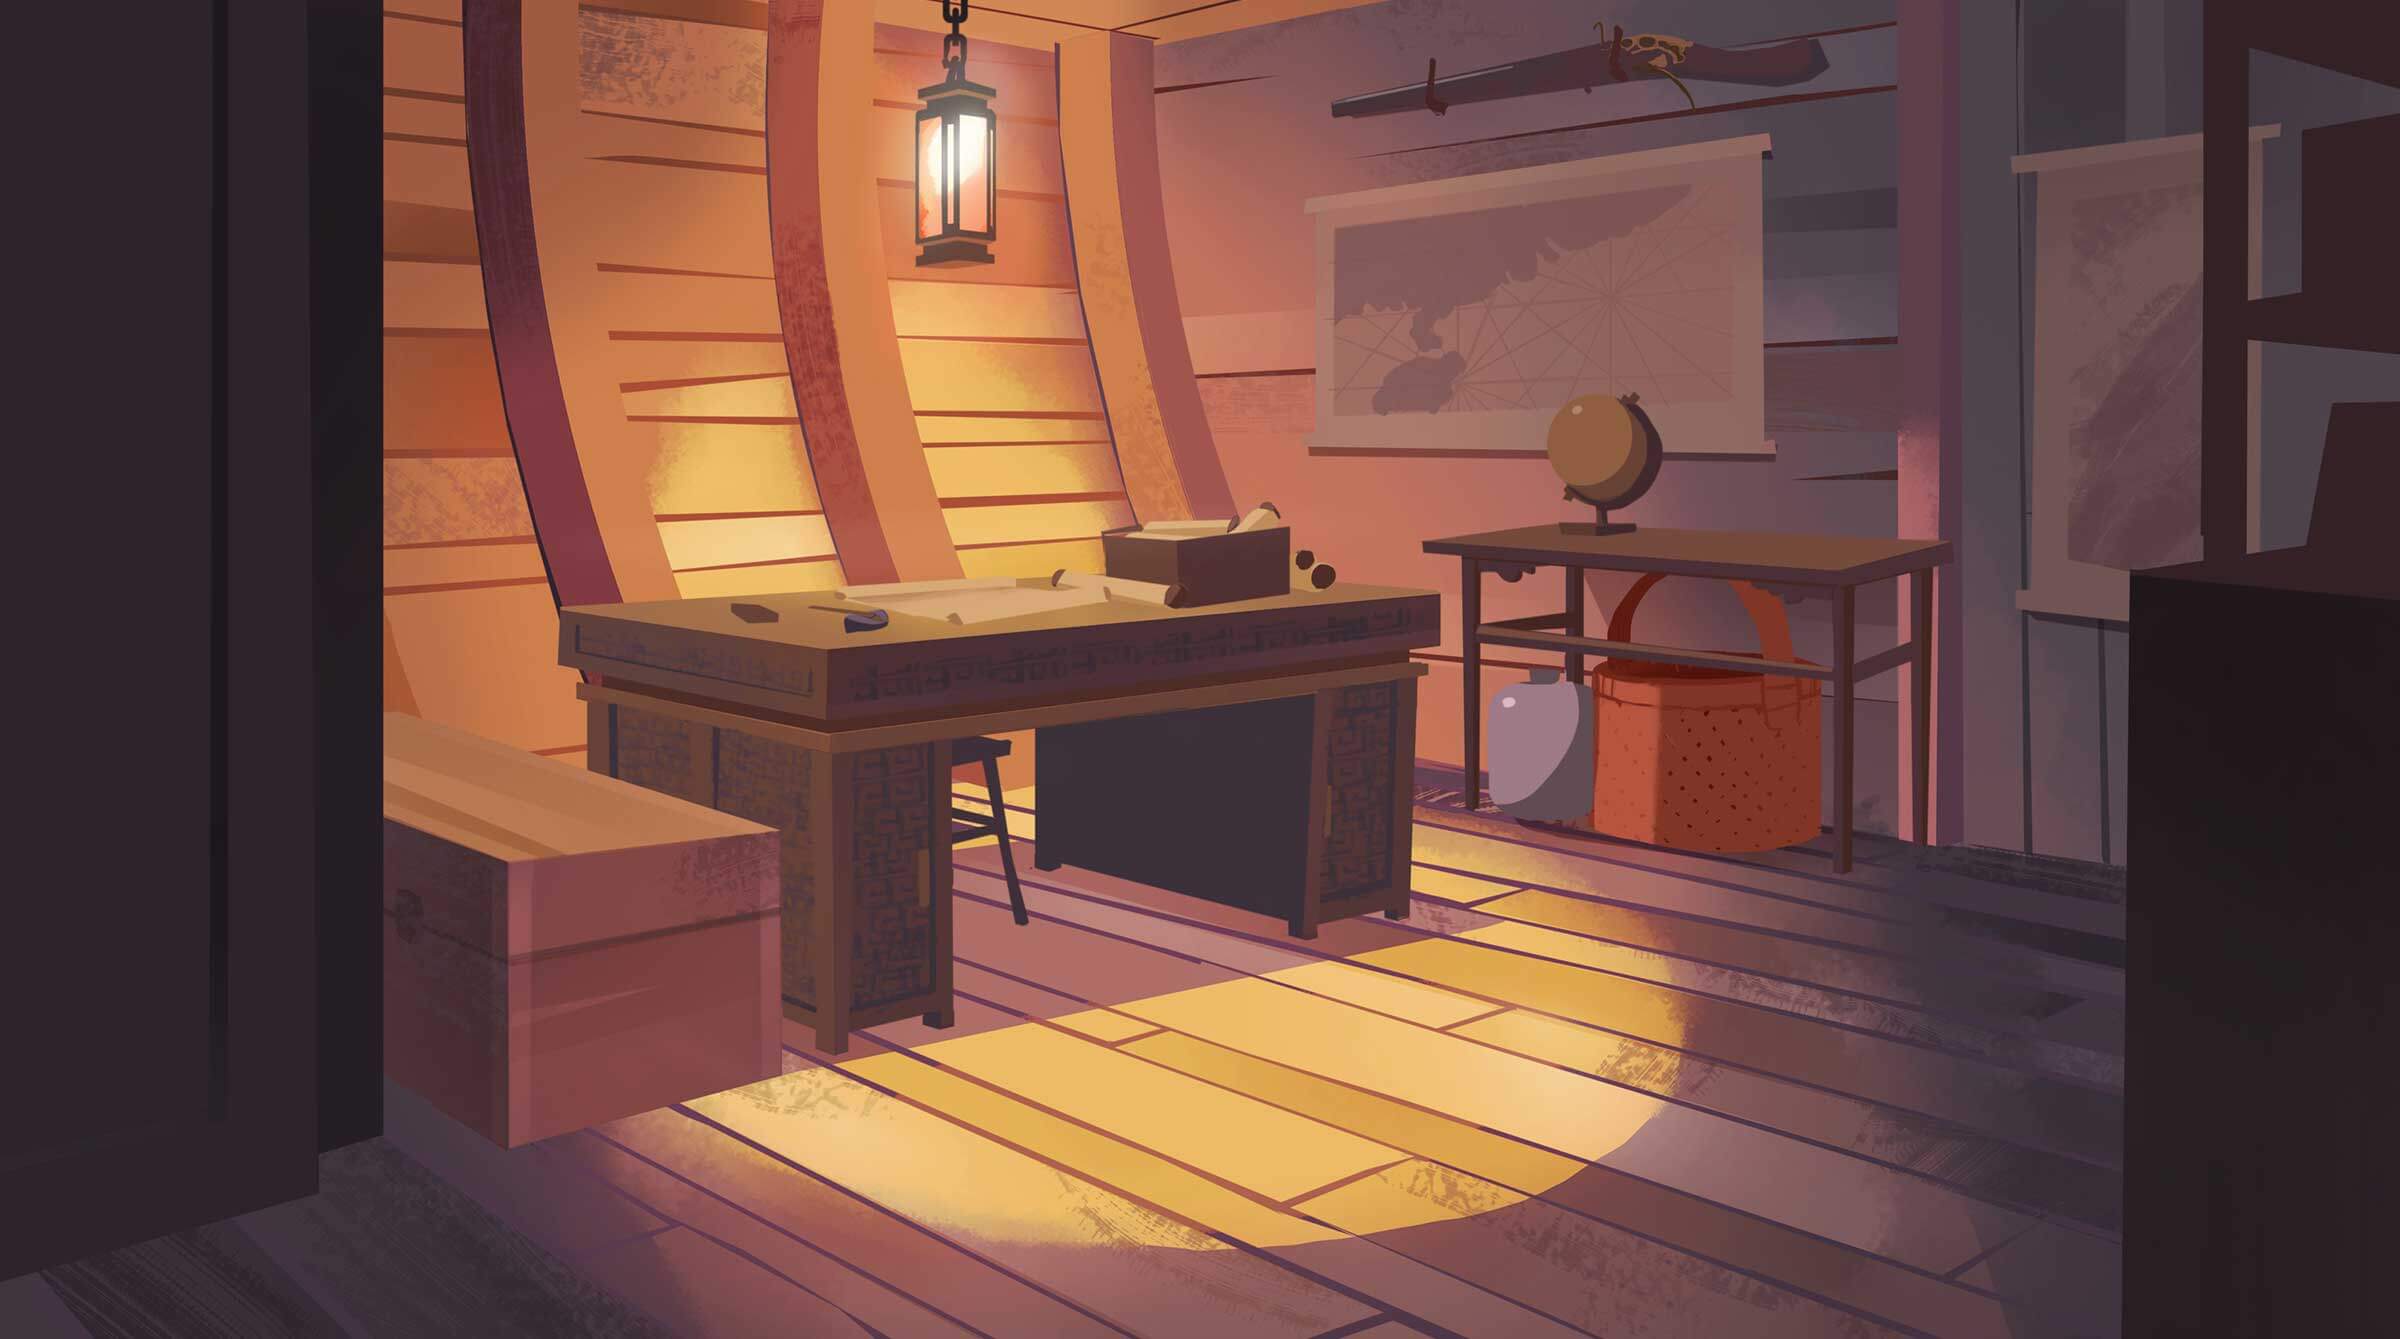 A desk space lit by a lantern within a wooden ship's interior.